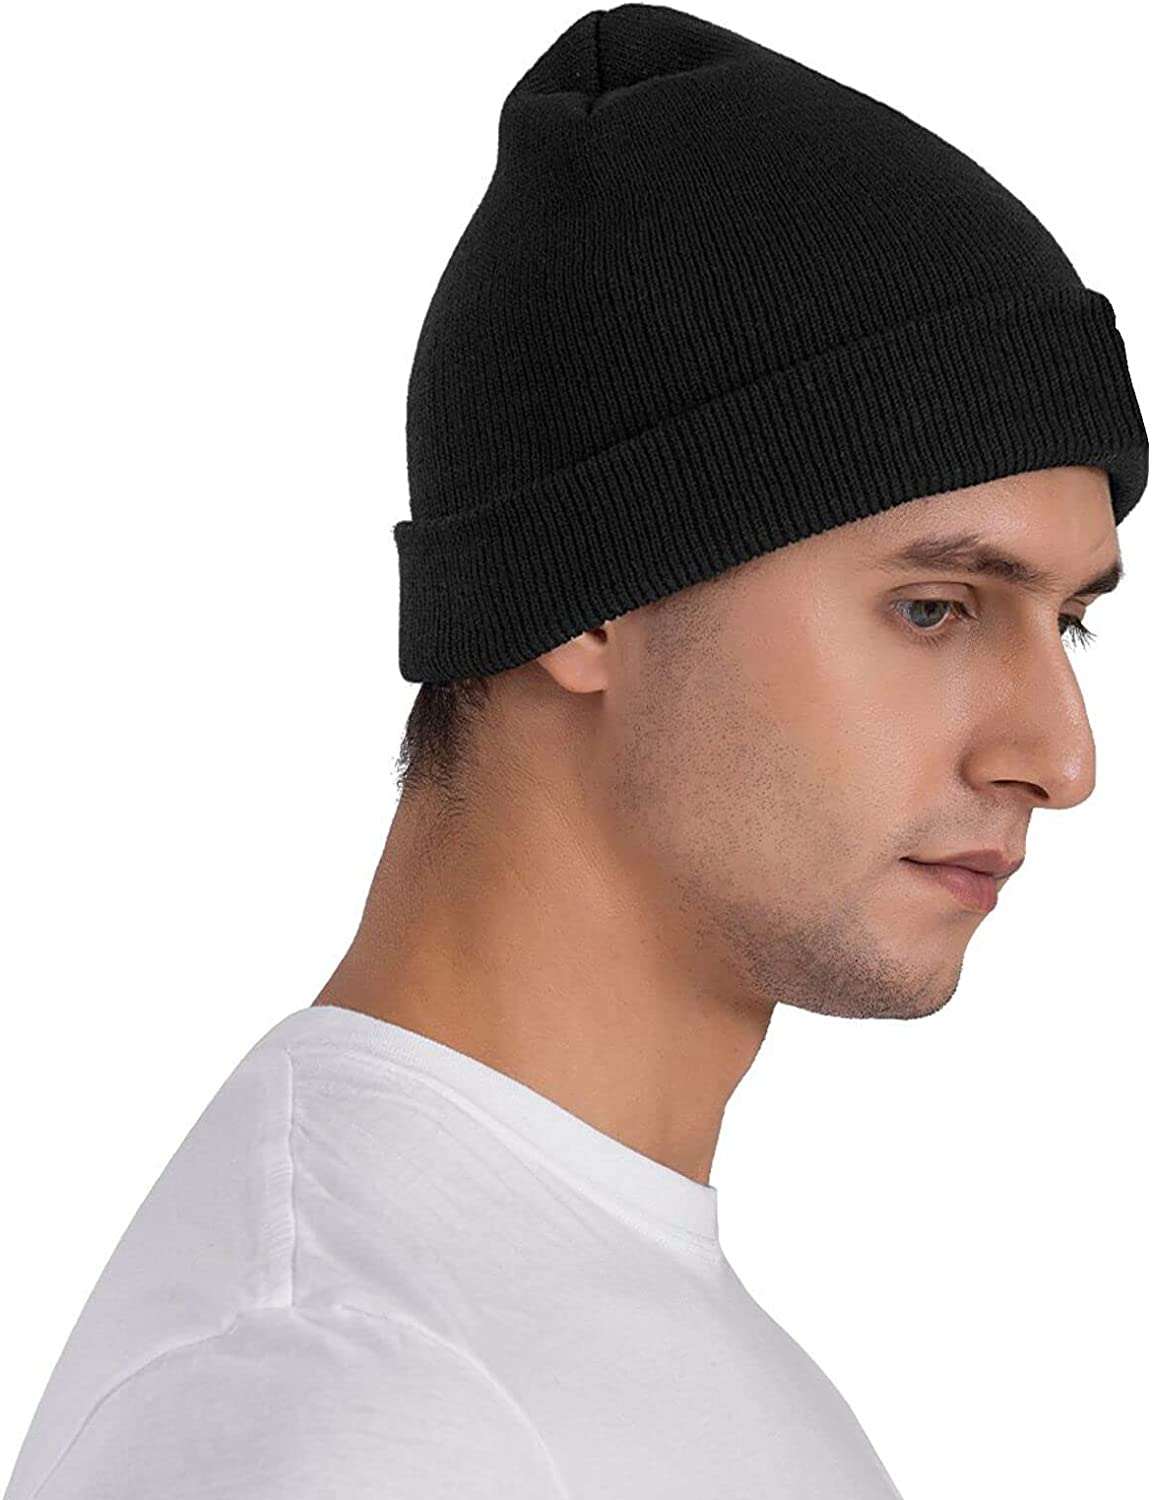 Hats Black Men Suicide Knit Logo Toboggan for Cap Women Beanie Weather Boys gogoherhome Cold Warm Embroidered Stretchy Soft for